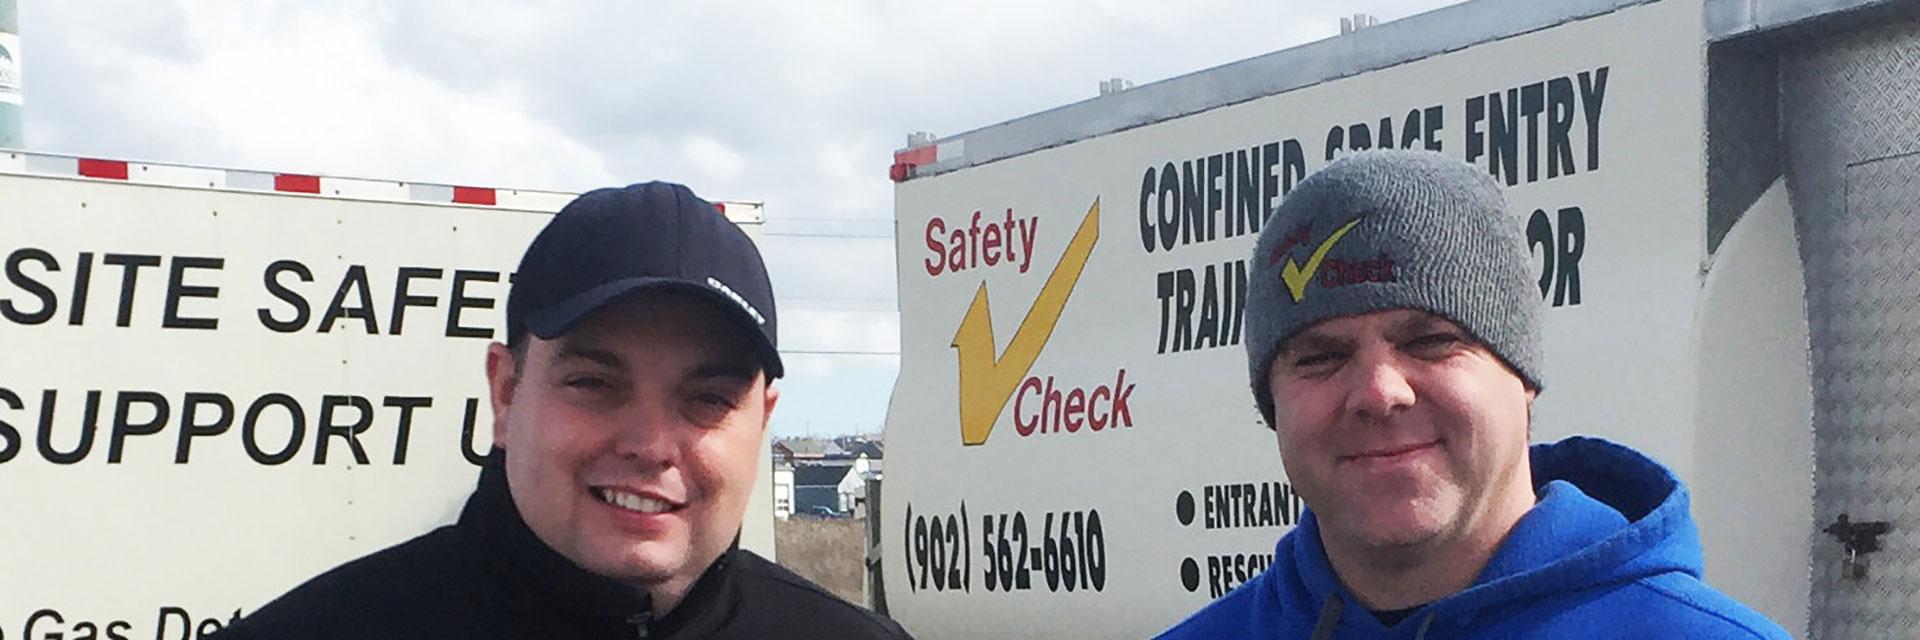 Two people standing in front of a Safety Check Inspections Limited training simulator